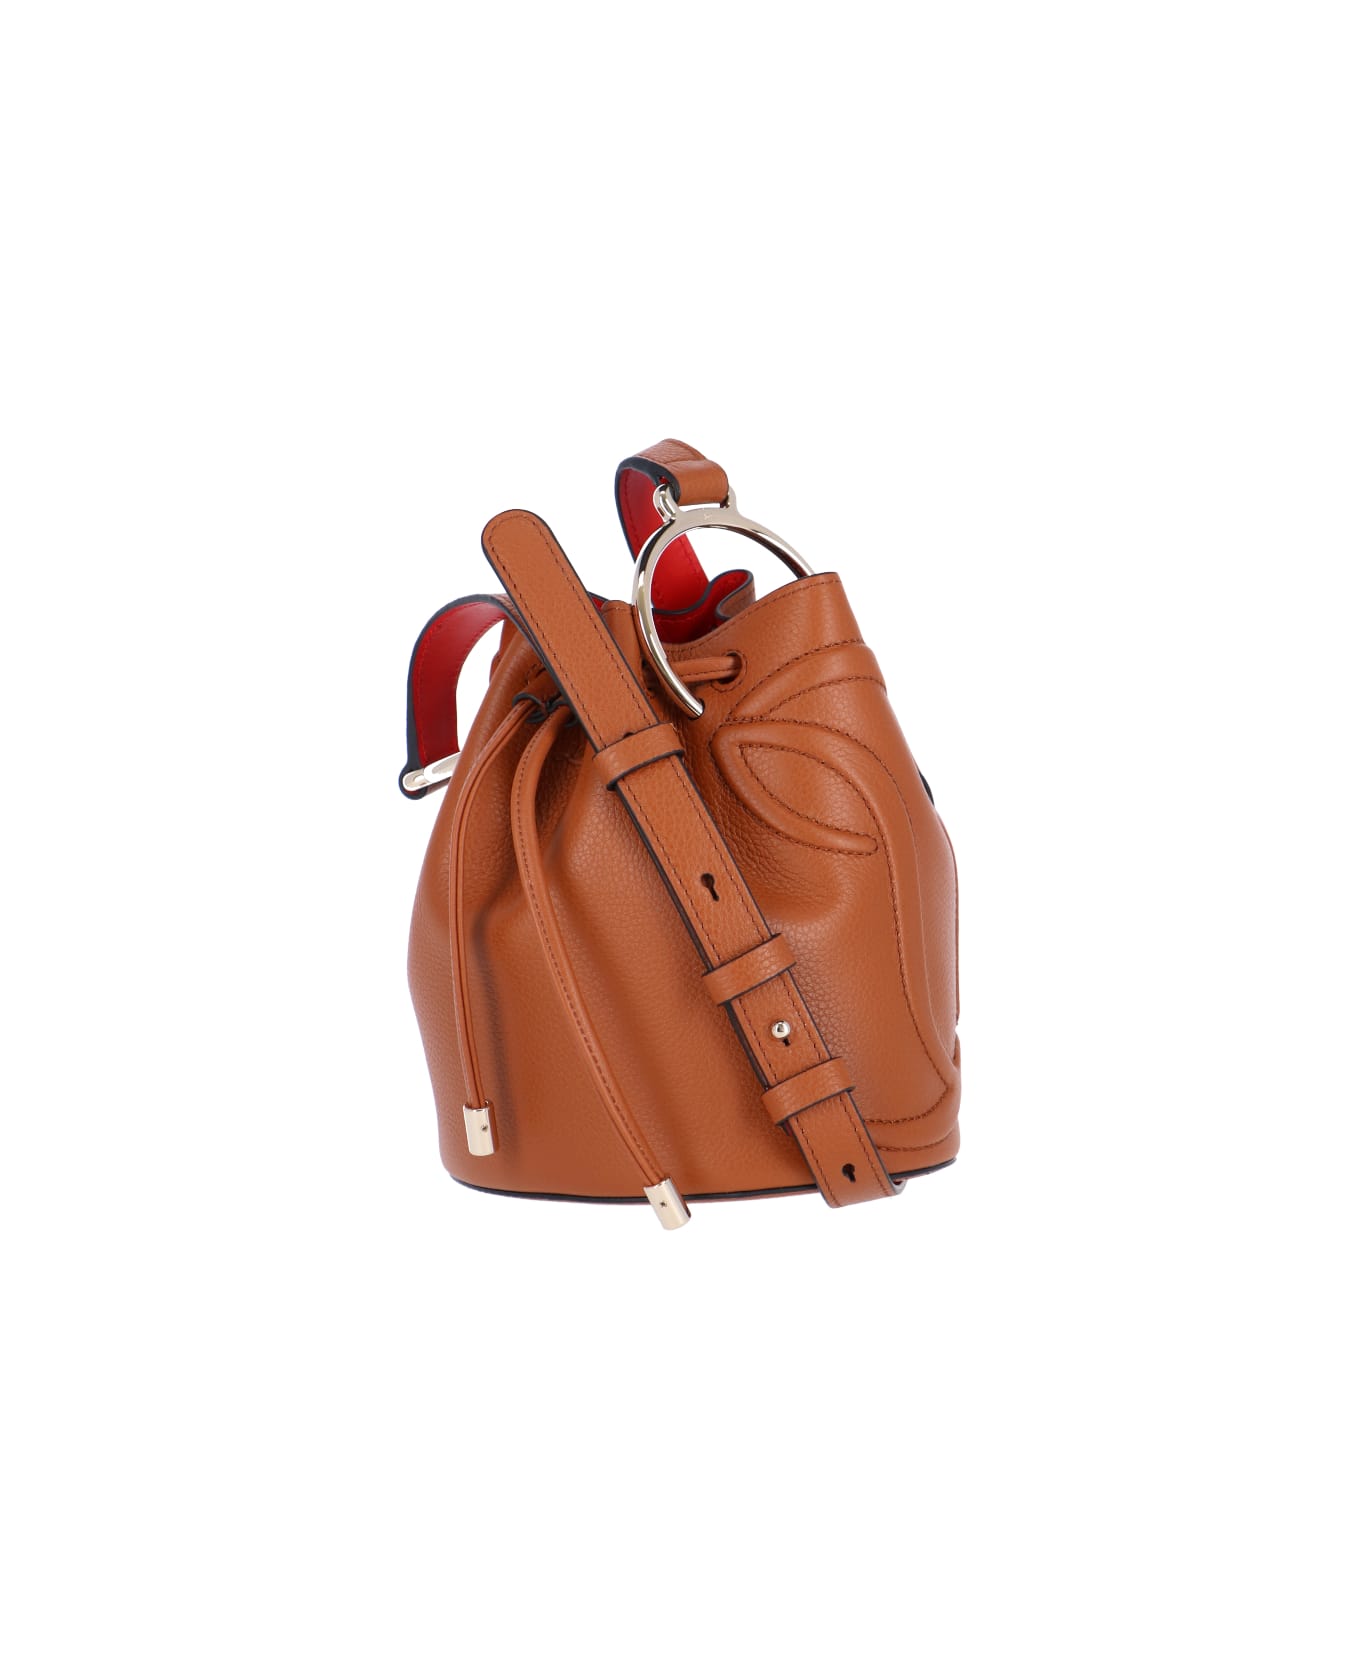 Christian Louboutin 'by My Side' Bucket Bag - Brown